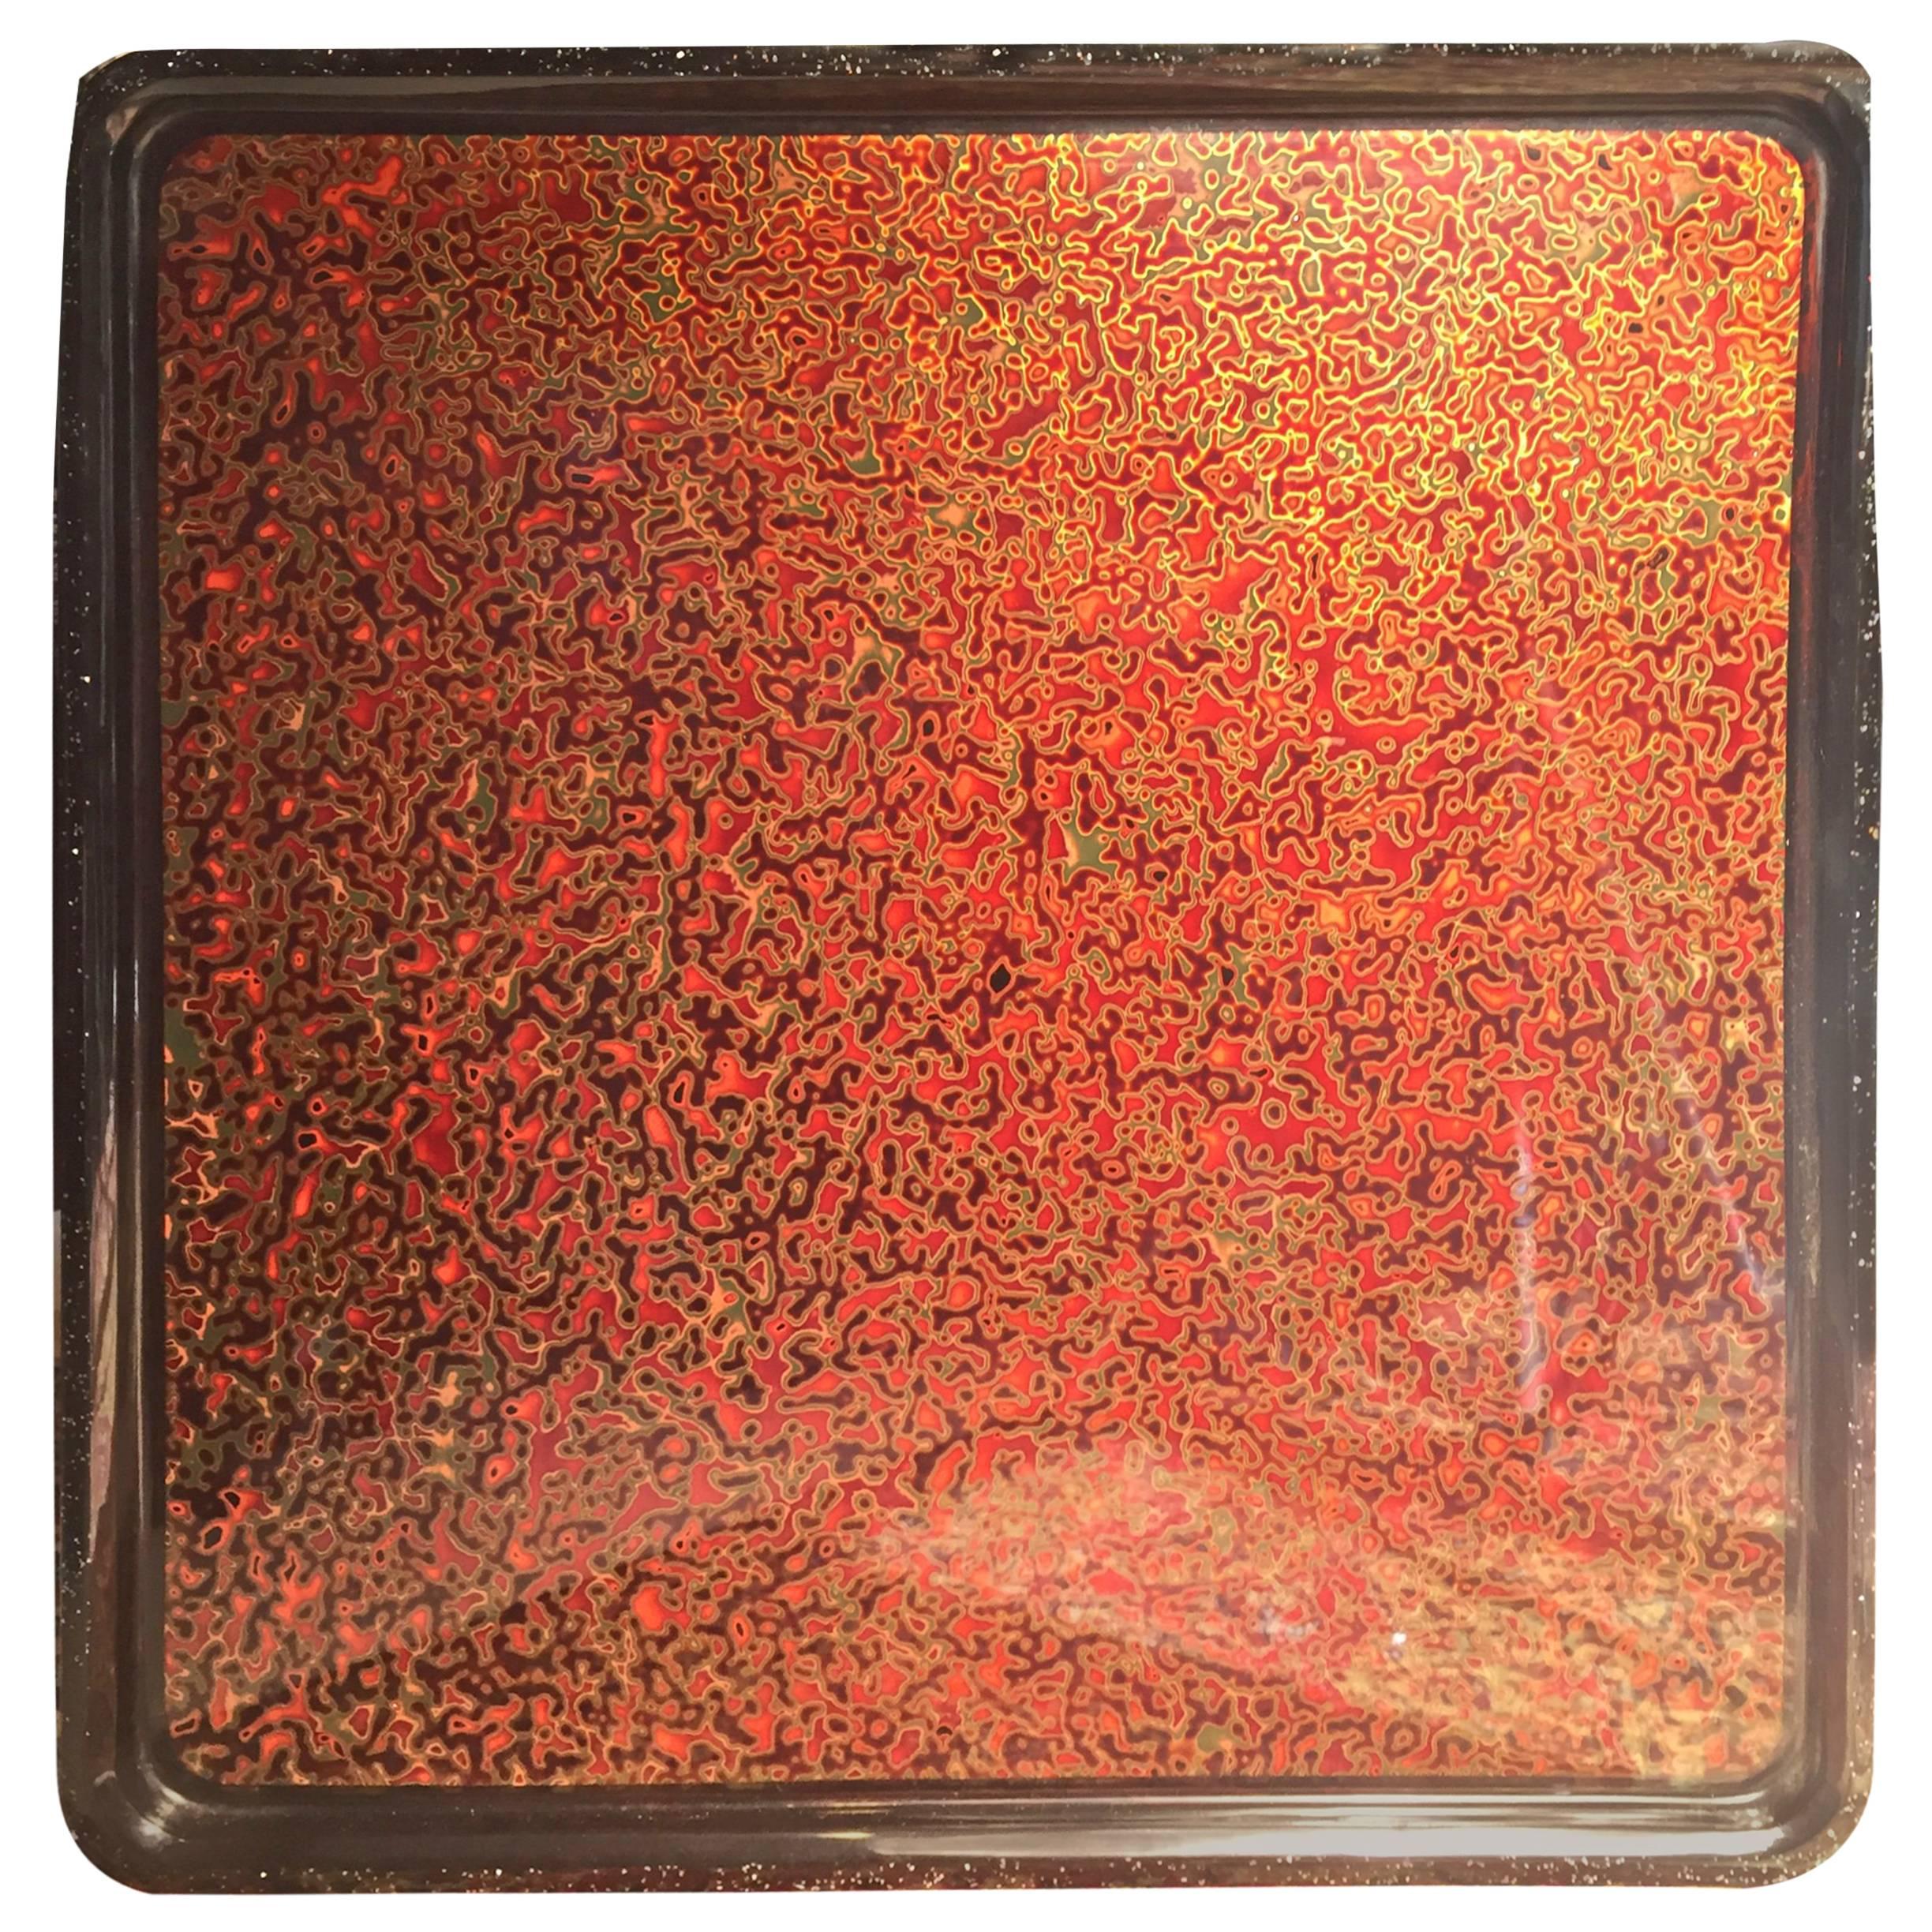 Japan Rich Lacquered Tray Wall Art -30 Layers of Red, Gold and Black